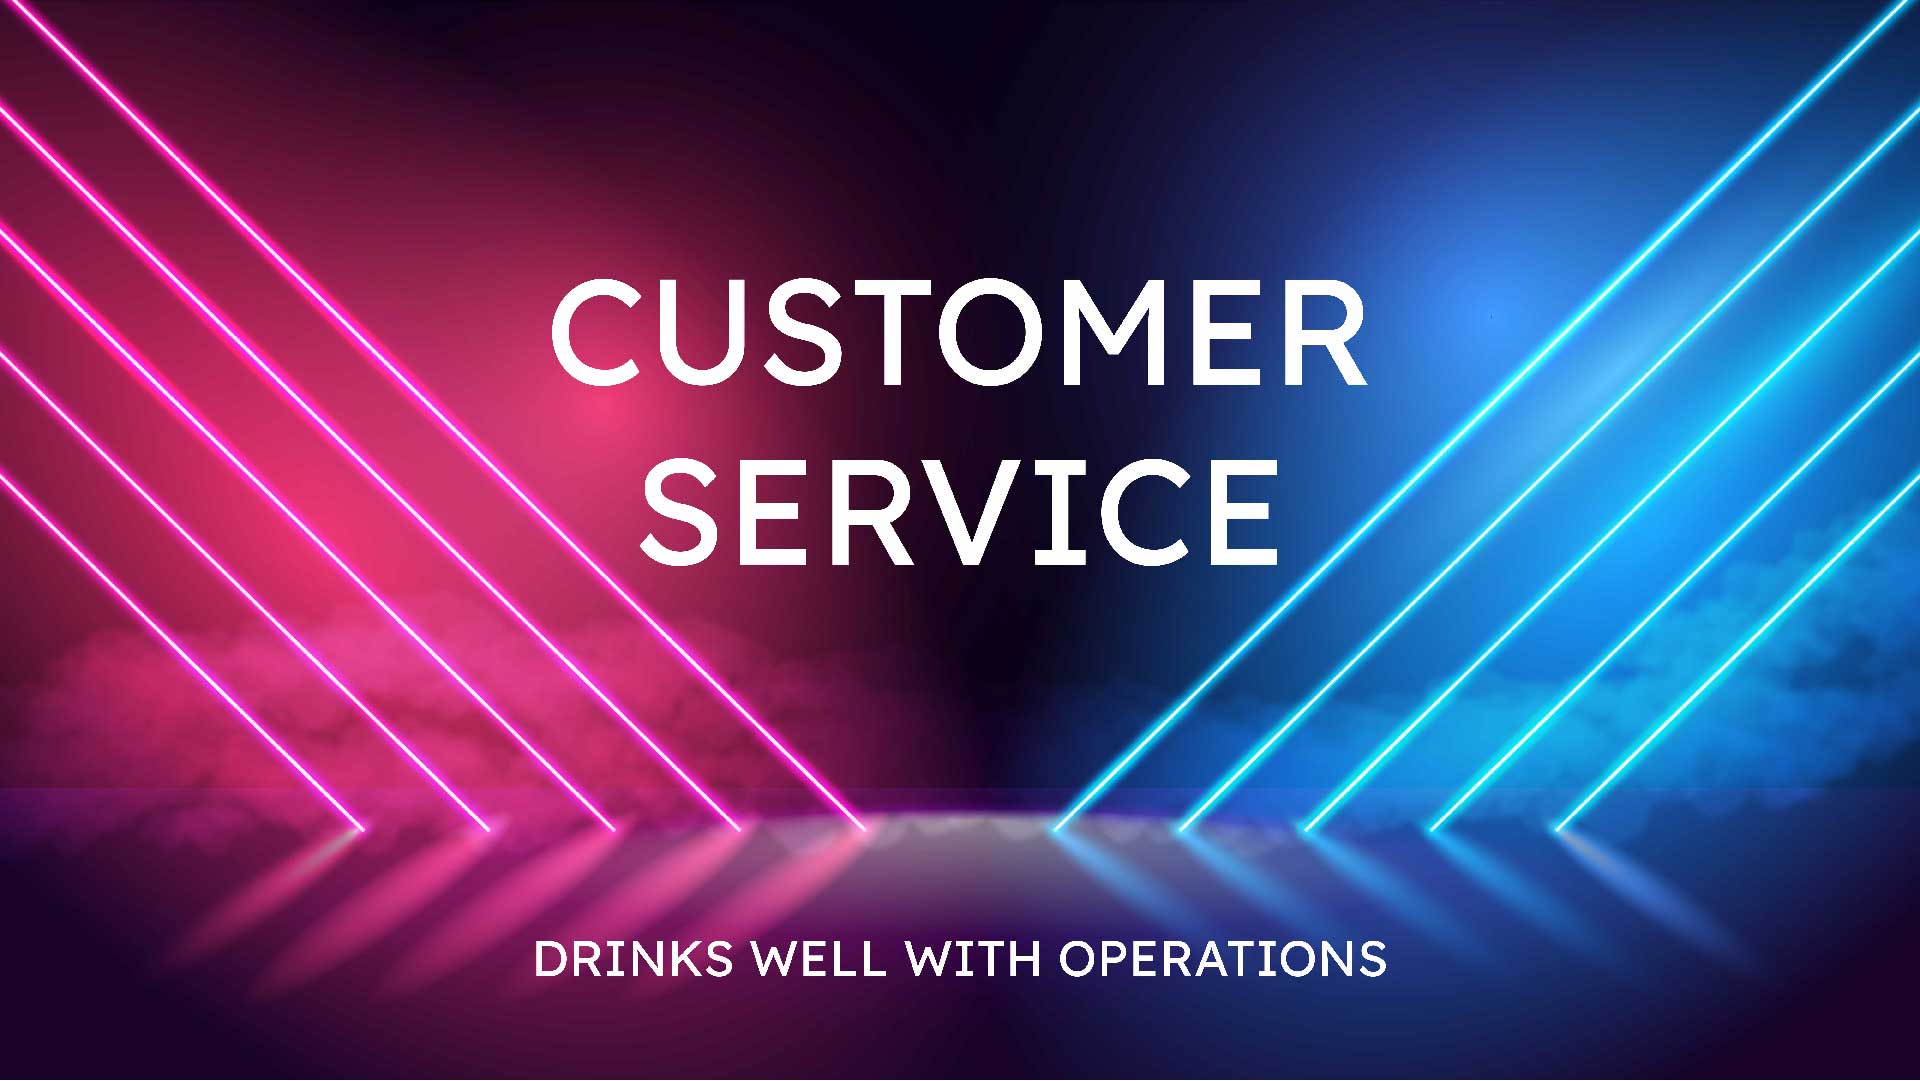 Drinks Well with Operations (E7) Customer Service